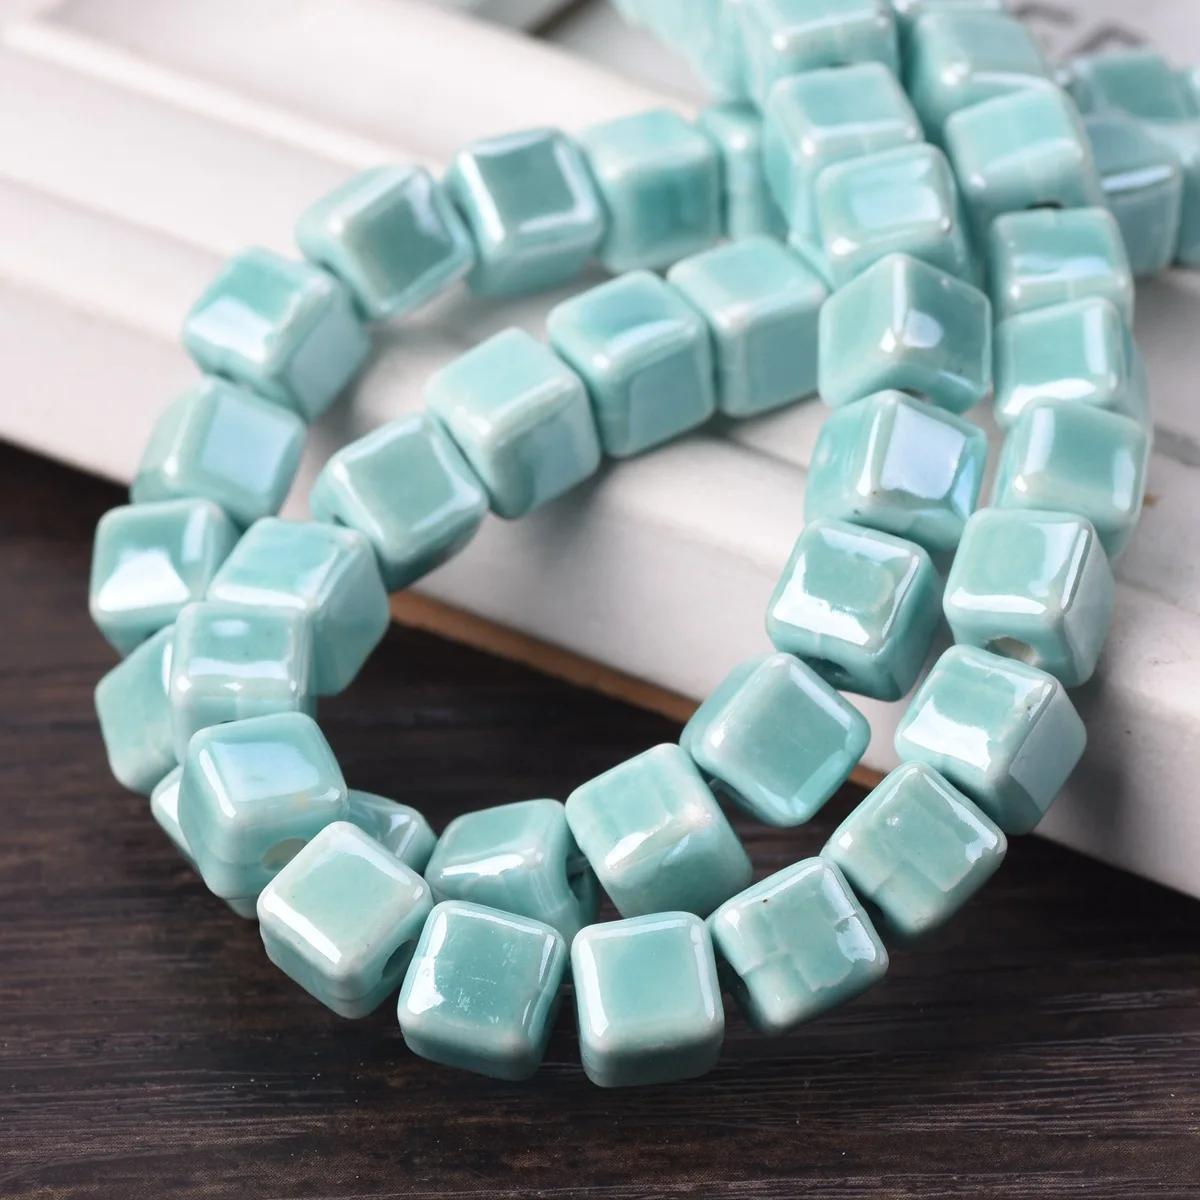 10pcs 8mm Cube Ceramic Porcelain Loose Craft Beads Charms For Jewelry Making DIY 